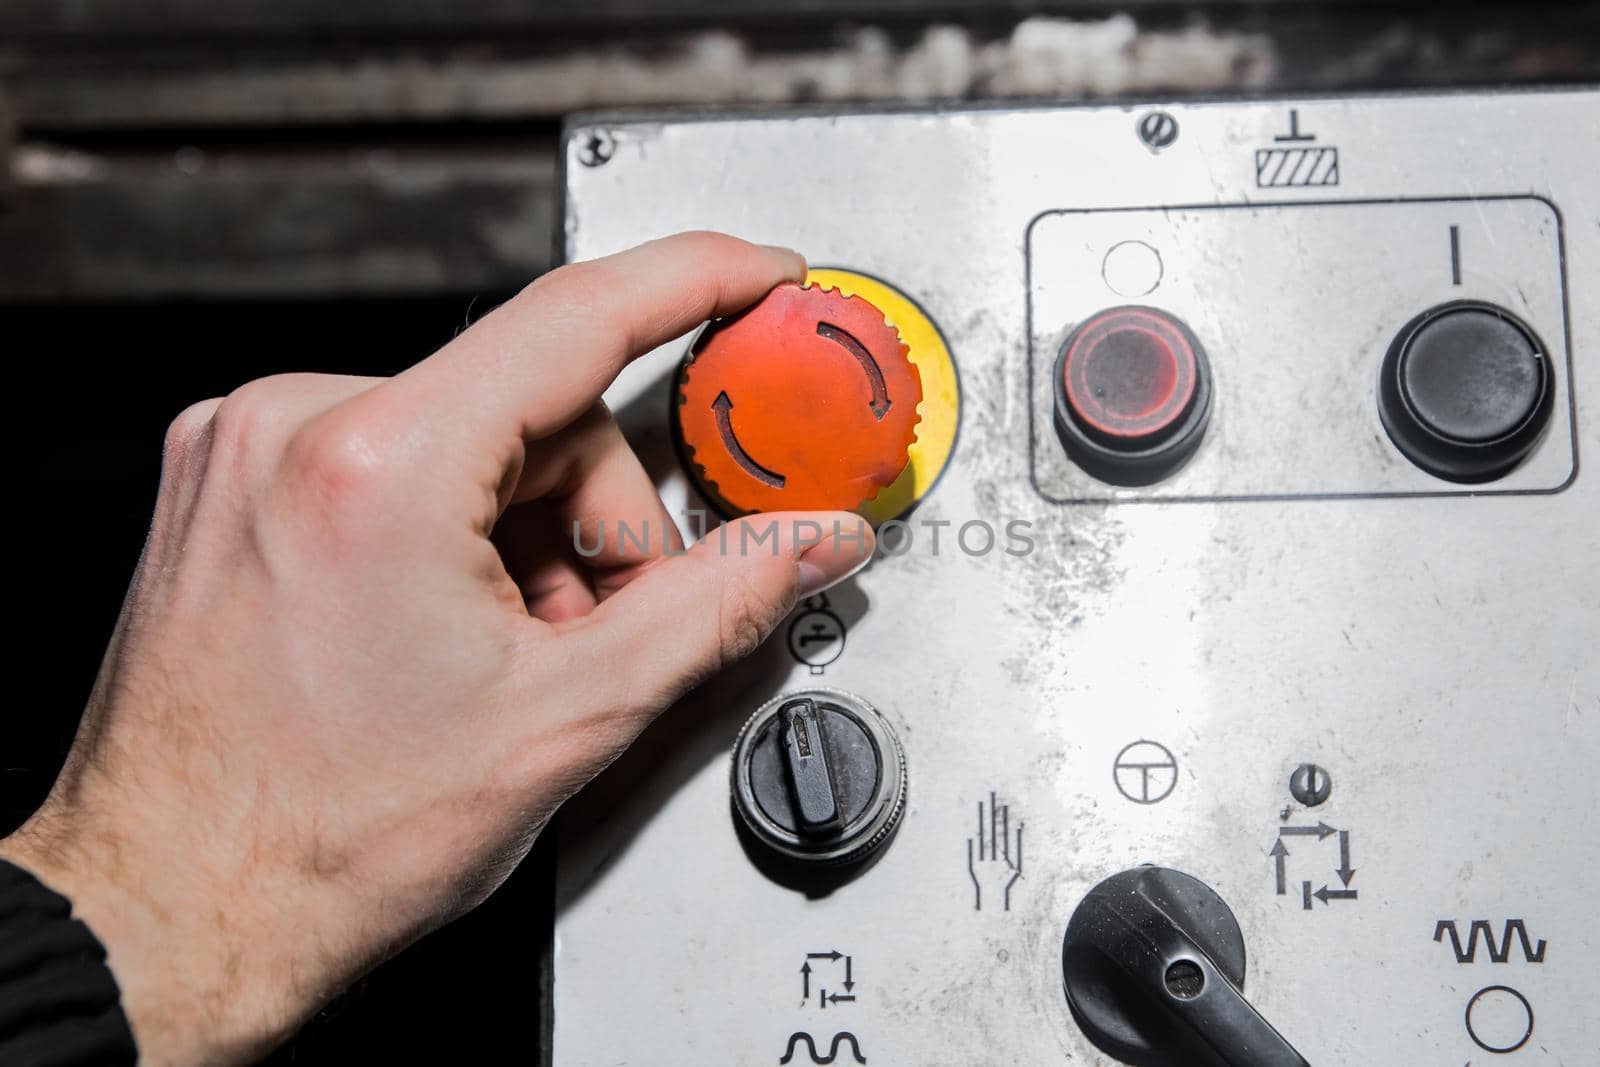 A man's hand turns the red button on an old industrial equipment control system.